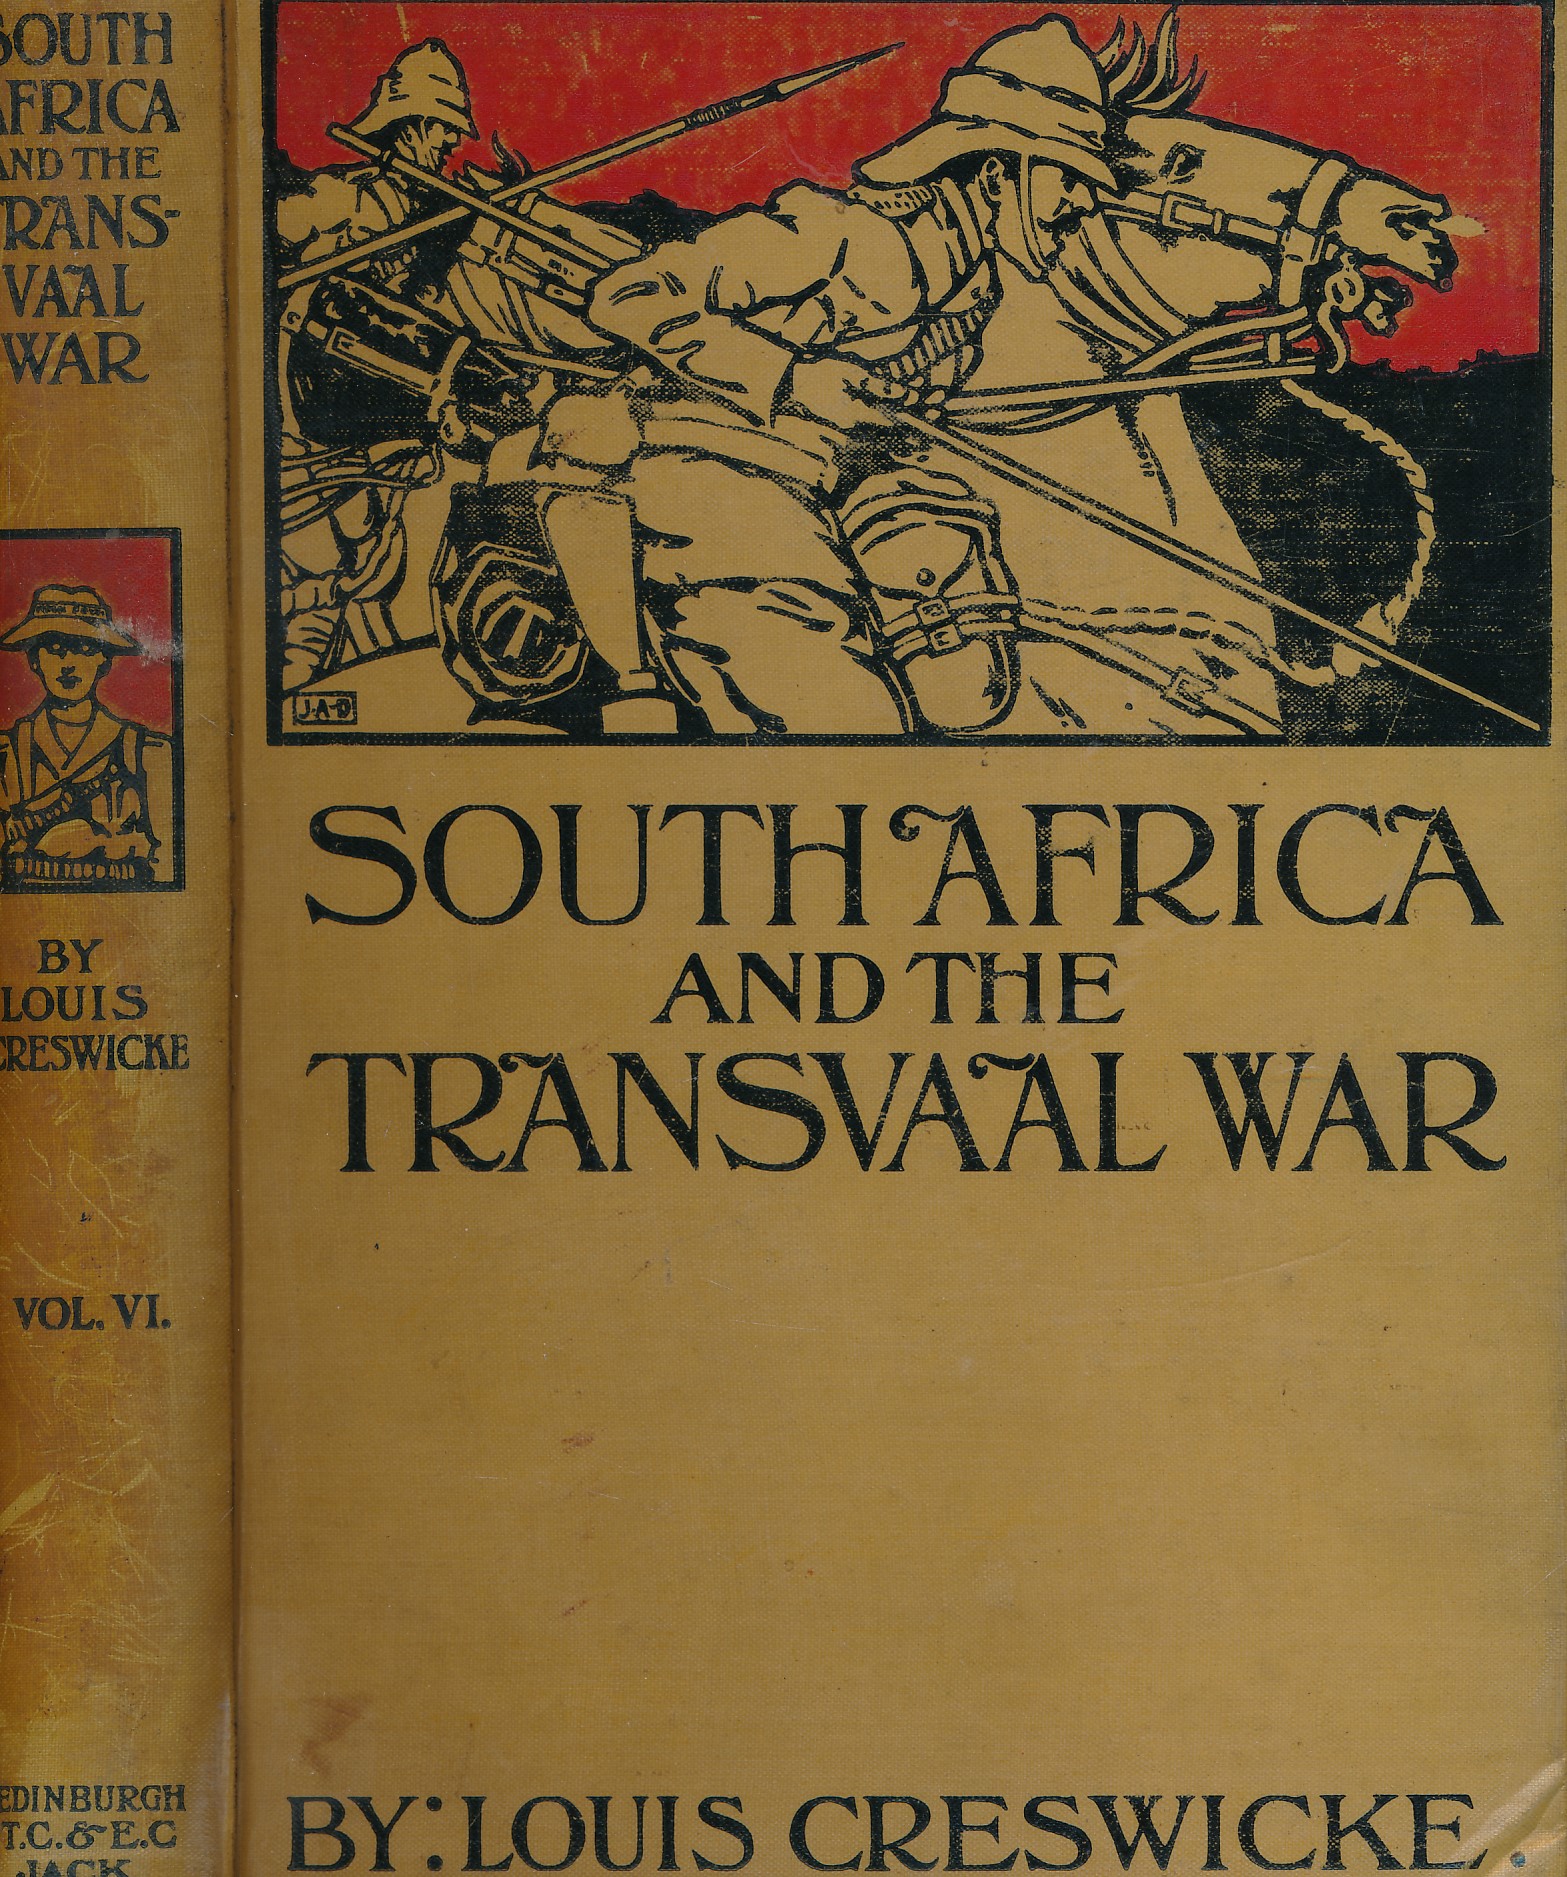 South Africa and the Transvaal War. Volume VI